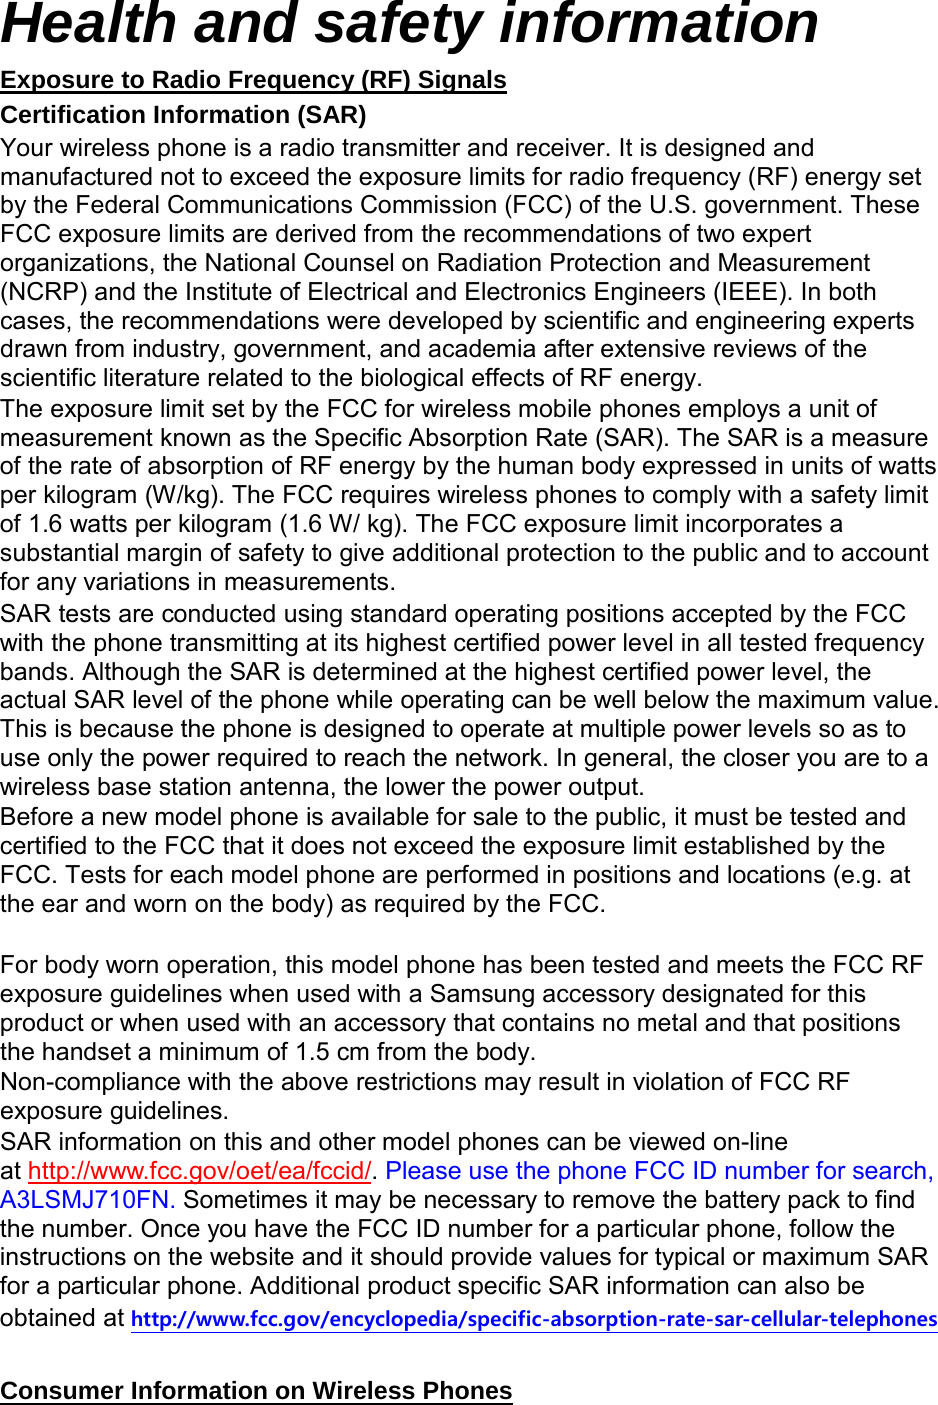 Health and safety information Certification Information (SAR) Exposure to Radio Frequency (RF) Signals Your wireless phone is a radio transmitter and receiver. It is designed and manufactured not to exceed the exposure limits for radio frequency (RF) energy set by the Federal Communications Commission (FCC) of the U.S. government. These FCC exposure limits are derived from the recommendations of two expert organizations, the National Counsel on Radiation Protection and Measurement (NCRP) and the Institute of Electrical and Electronics Engineers (IEEE). In both cases, the recommendations were developed by scientific and engineering experts drawn from industry, government, and academia after extensive reviews of the scientific literature related to the biological effects of RF energy. The exposure limit set by the FCC for wireless mobile phones employs a unit of measurement known as the Specific Absorption Rate (SAR). The SAR is a measure of the rate of absorption of RF energy by the human body expressed in units of watts per kilogram (W/kg). The FCC requires wireless phones to comply with a safety limit of 1.6 watts per kilogram (1.6 W/ kg). The FCC exposure limit incorporates a substantial margin of safety to give additional protection to the public and to account for any variations in measurements. SAR tests are conducted using standard operating positions accepted by the FCC with the phone transmitting at its highest certified power level in all tested frequency bands. Although the SAR is determined at the highest certified power level, the actual SAR level of the phone while operating can be well below the maximum value. This is because the phone is designed to operate at multiple power levels so as to use only the power required to reach the network. In general, the closer you are to a wireless base station antenna, the lower the power output. Before a new model phone is available for sale to the public, it must be tested and certified to the FCC that it does not exceed the exposure limit established by the FCC. Tests for each model phone are performed in positions and locations (e.g. at the ear and worn on the body) as required by the FCC.      For body worn operation, this model phone has been tested and meets the FCC RF exposure guidelines when used with a Samsung accessory designated for this product or when used with an accessory that contains no metal and that positions the handset a minimum of 1.5 cm from the body.   Non-compliance with the above restrictions may result in violation of FCC RF exposure guidelines. SAR information on this and other model phones can be viewed on-line at http://www.fcc.gov/oet/ea/fccid/. Please use the phone FCC ID number for search, A3LSMJ710FN. Sometimes it may be necessary to remove the battery pack to find the number. Once you have the FCC ID number for a particular phone, follow the instructions on the website and it should provide values for typical or maximum SAR for a particular phone. Additional product specific SAR information can also be obtained at http://www.fcc.gov/encyclopedia/specific-absorption-rate-sar-cellular-telephones  Consumer Information on Wireless Phones 